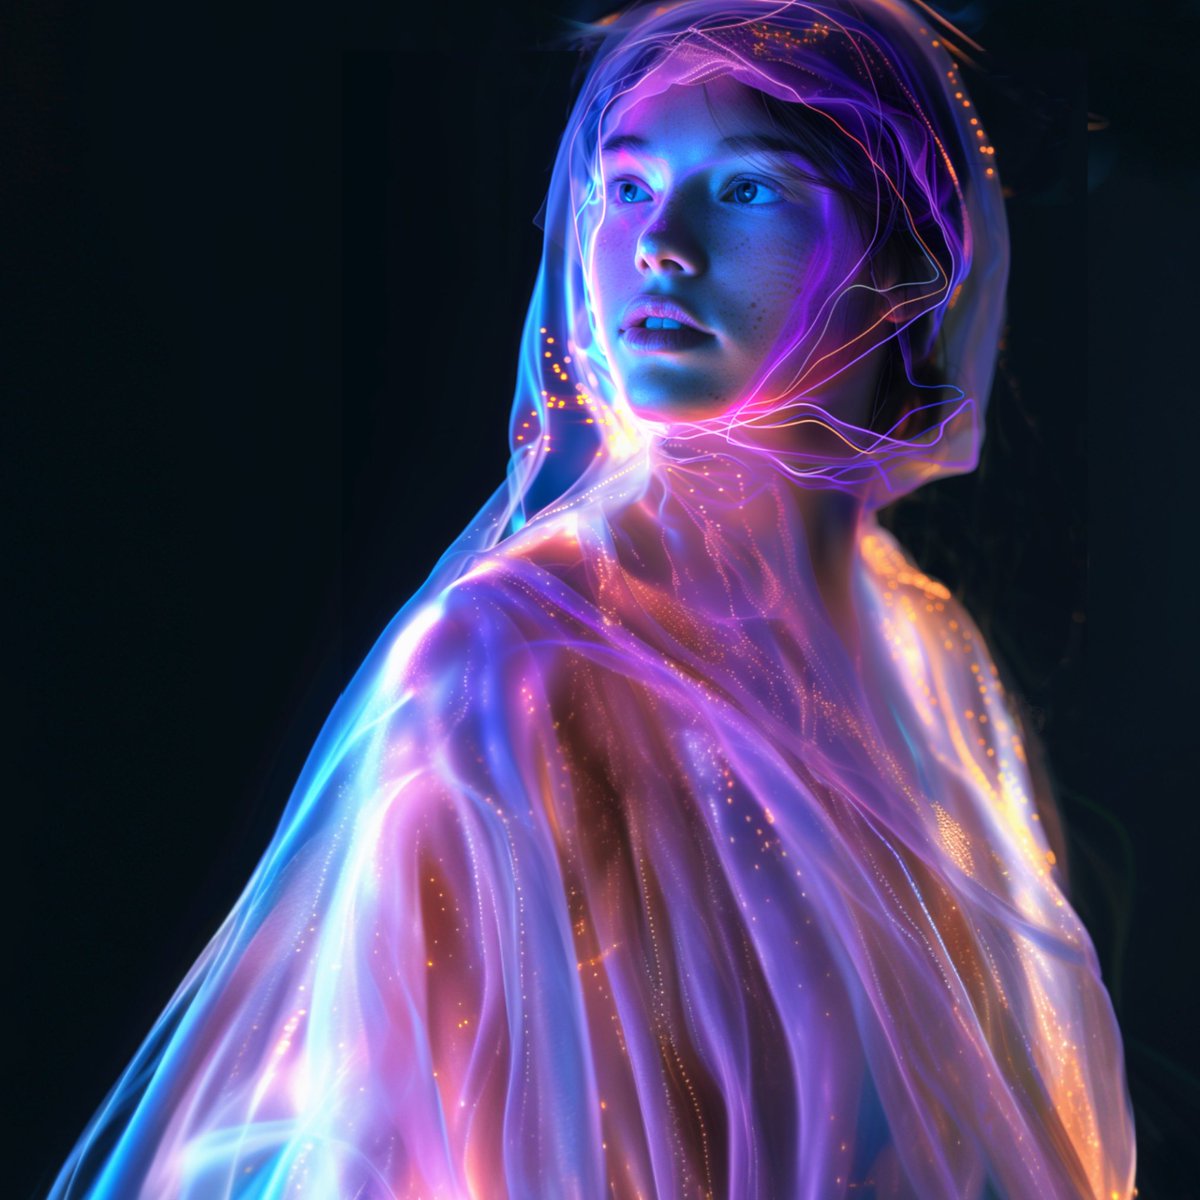 The space cape is made of a semi-living material inspired by deep-sea creatures.
Characteristics: Bioluminescence, electrical protection, oxygenation, resistance to pressure, invisibility by imitation of colors and textures, modular density.
1/2